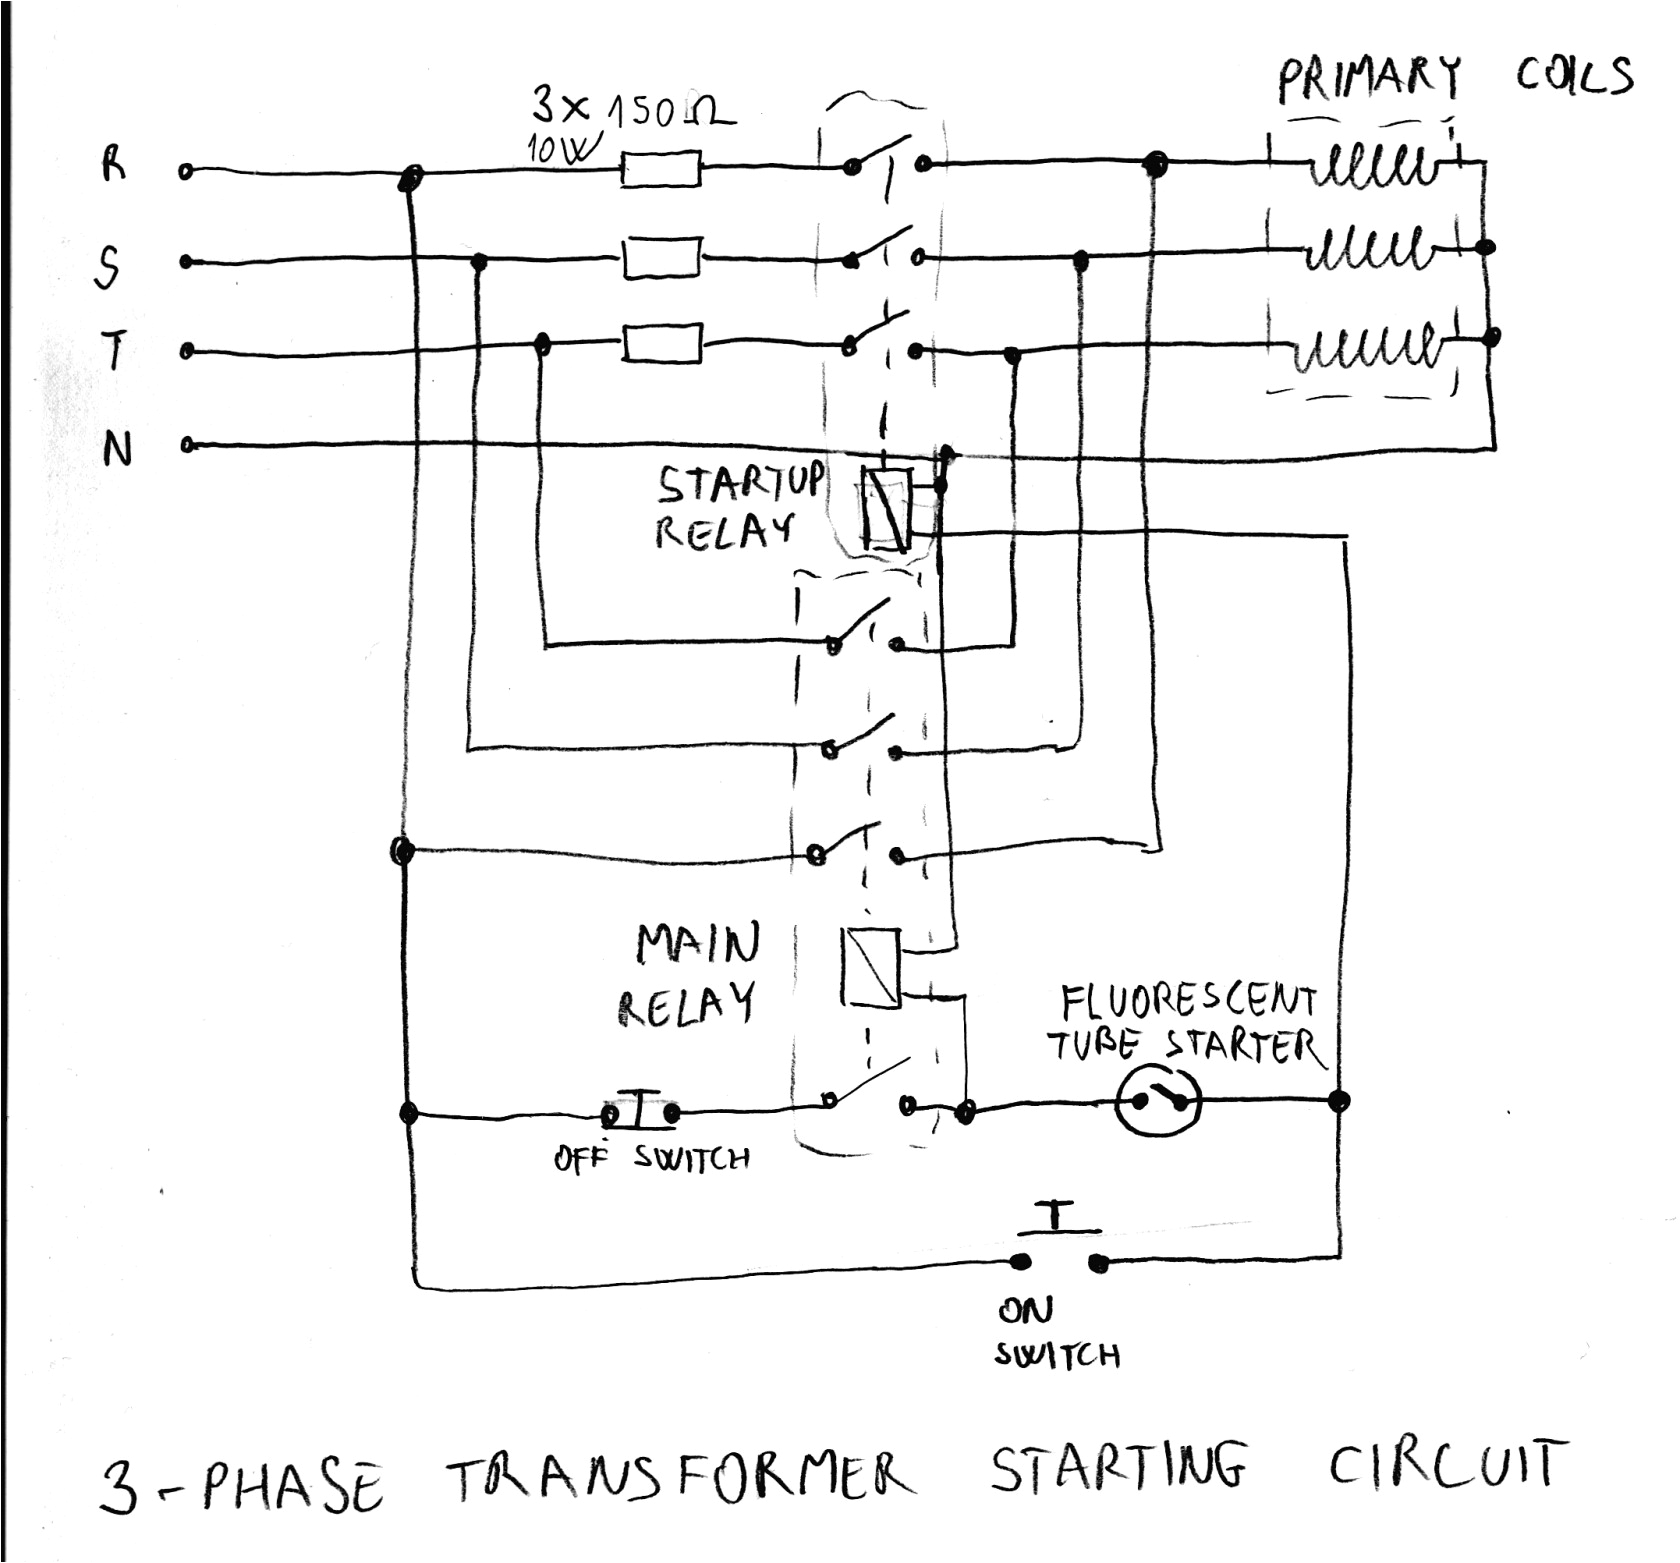 how to read this 480v single phase transformer wiring caroldoey 480v single phase transformer wiring diagram